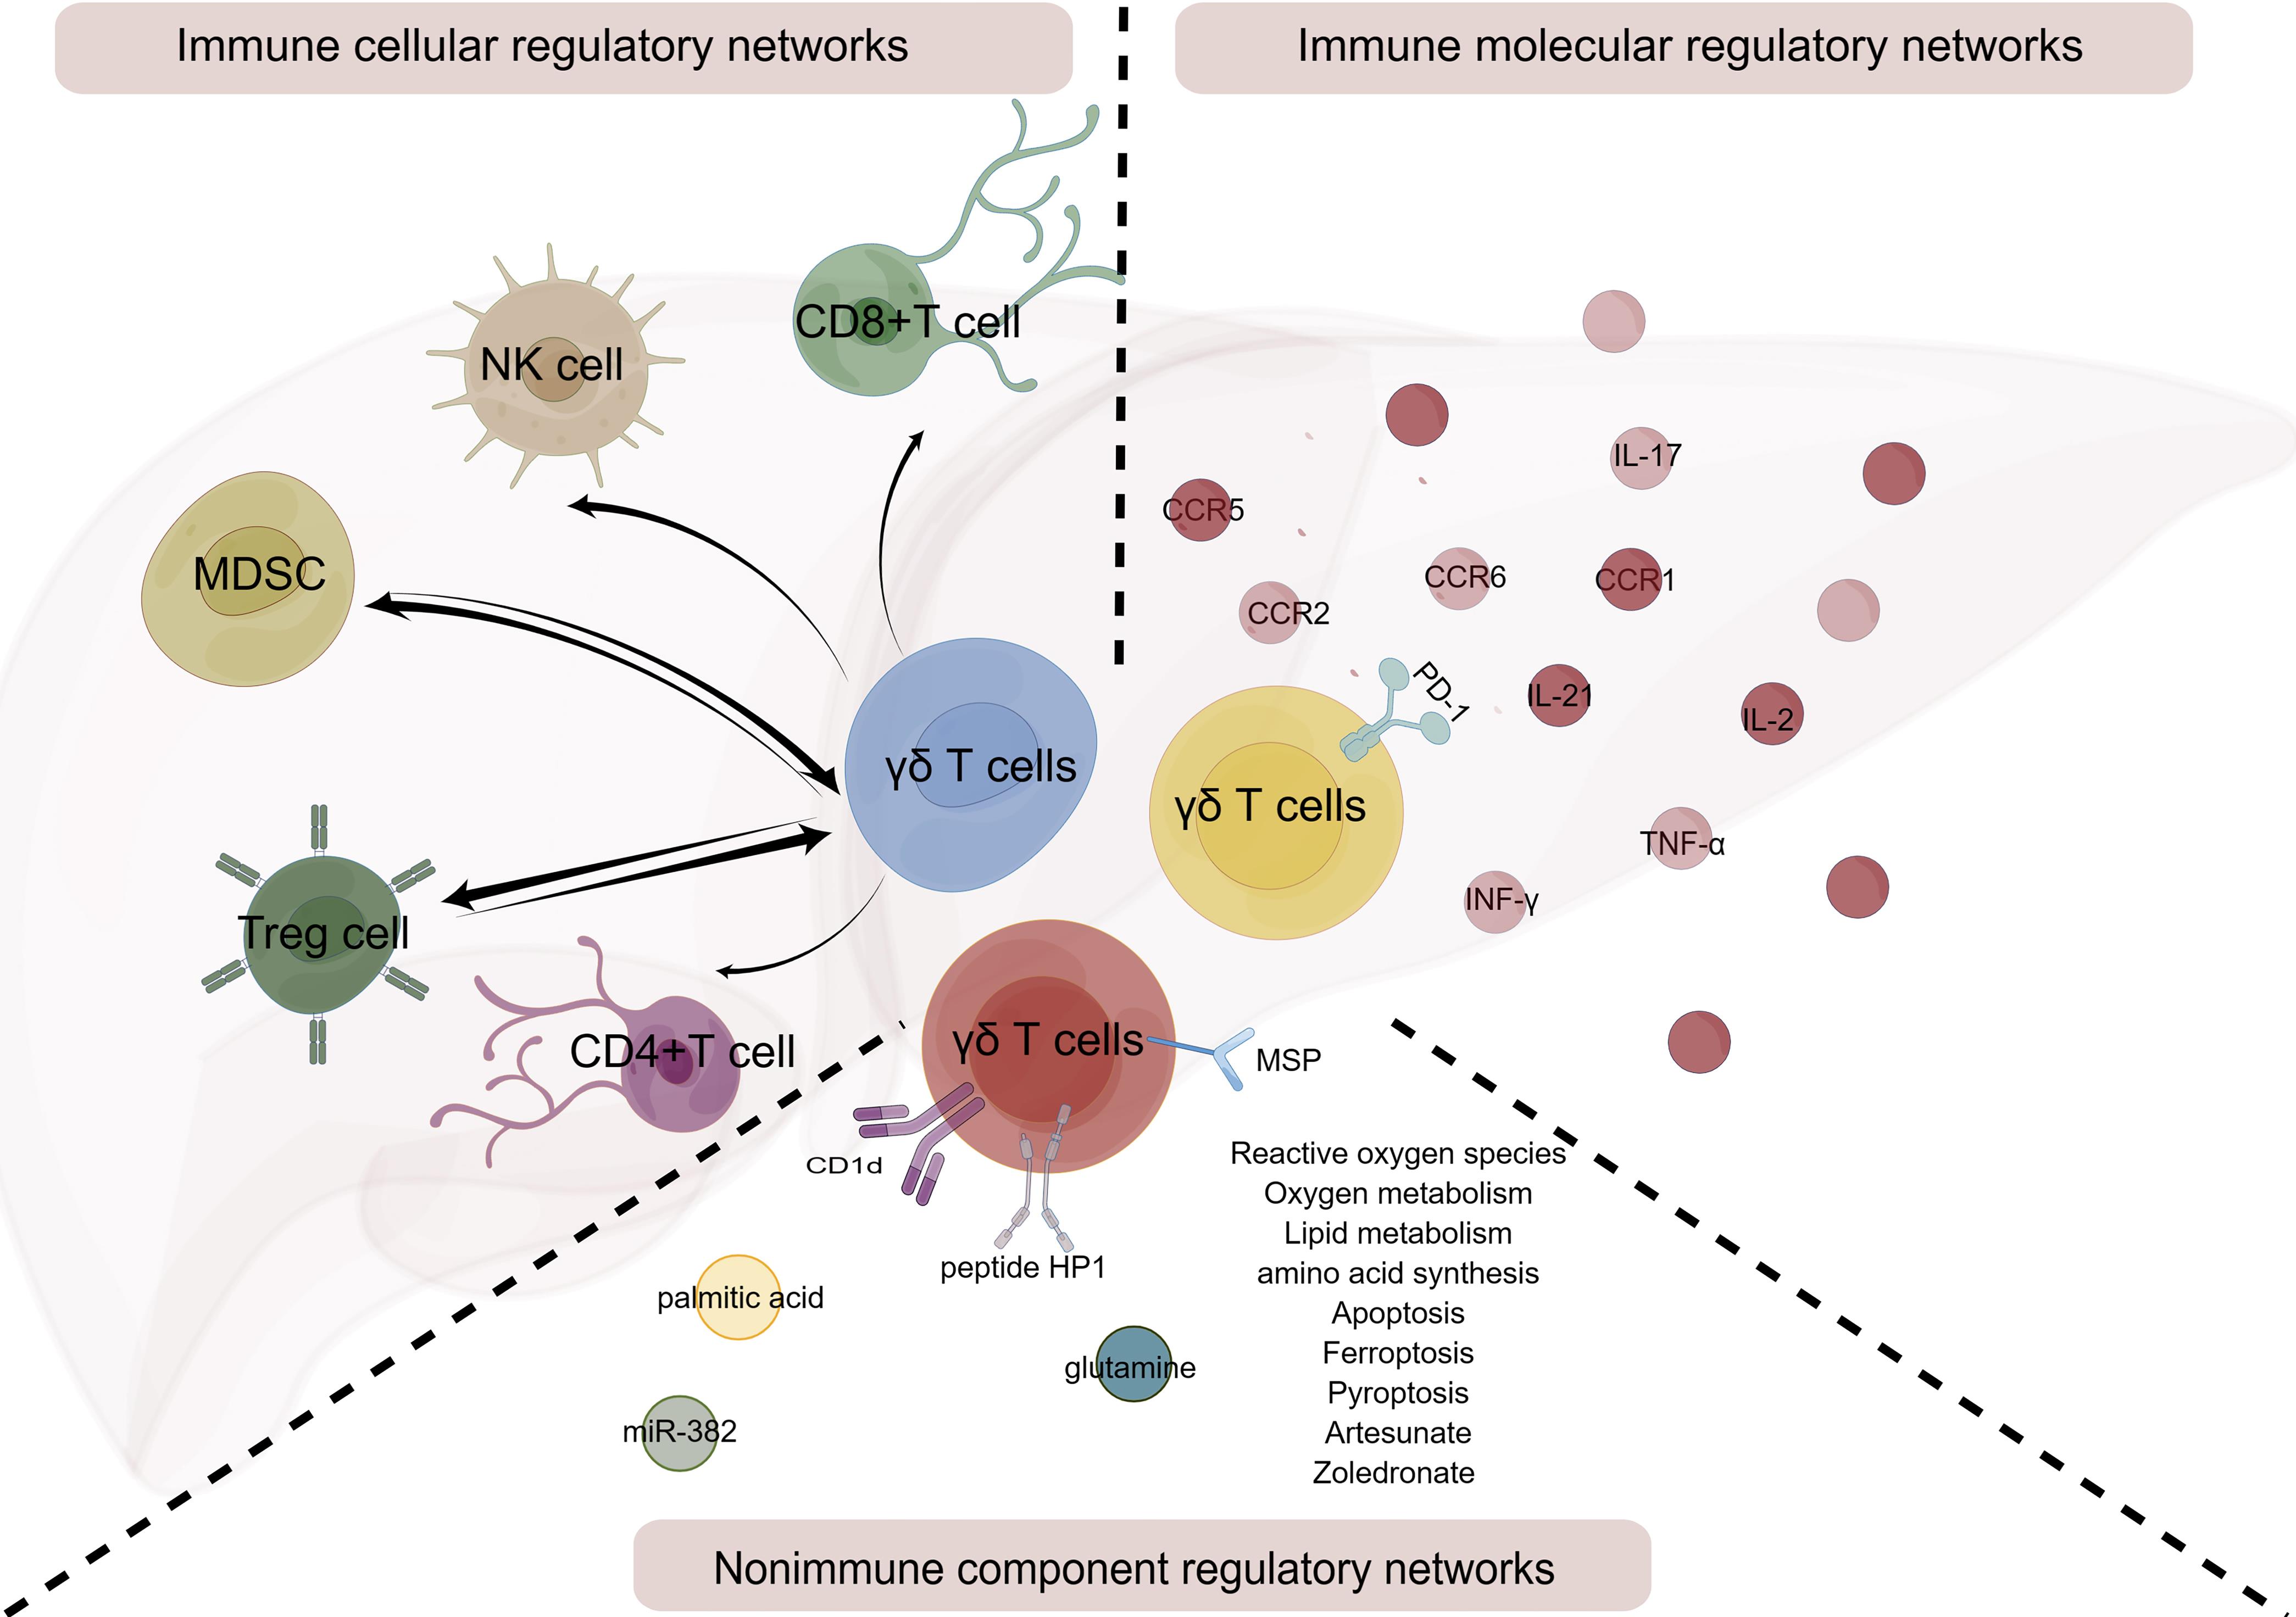 Brief summary of immune regulatory networks of γδ T cells involved in the microenvironment of liver cancer.